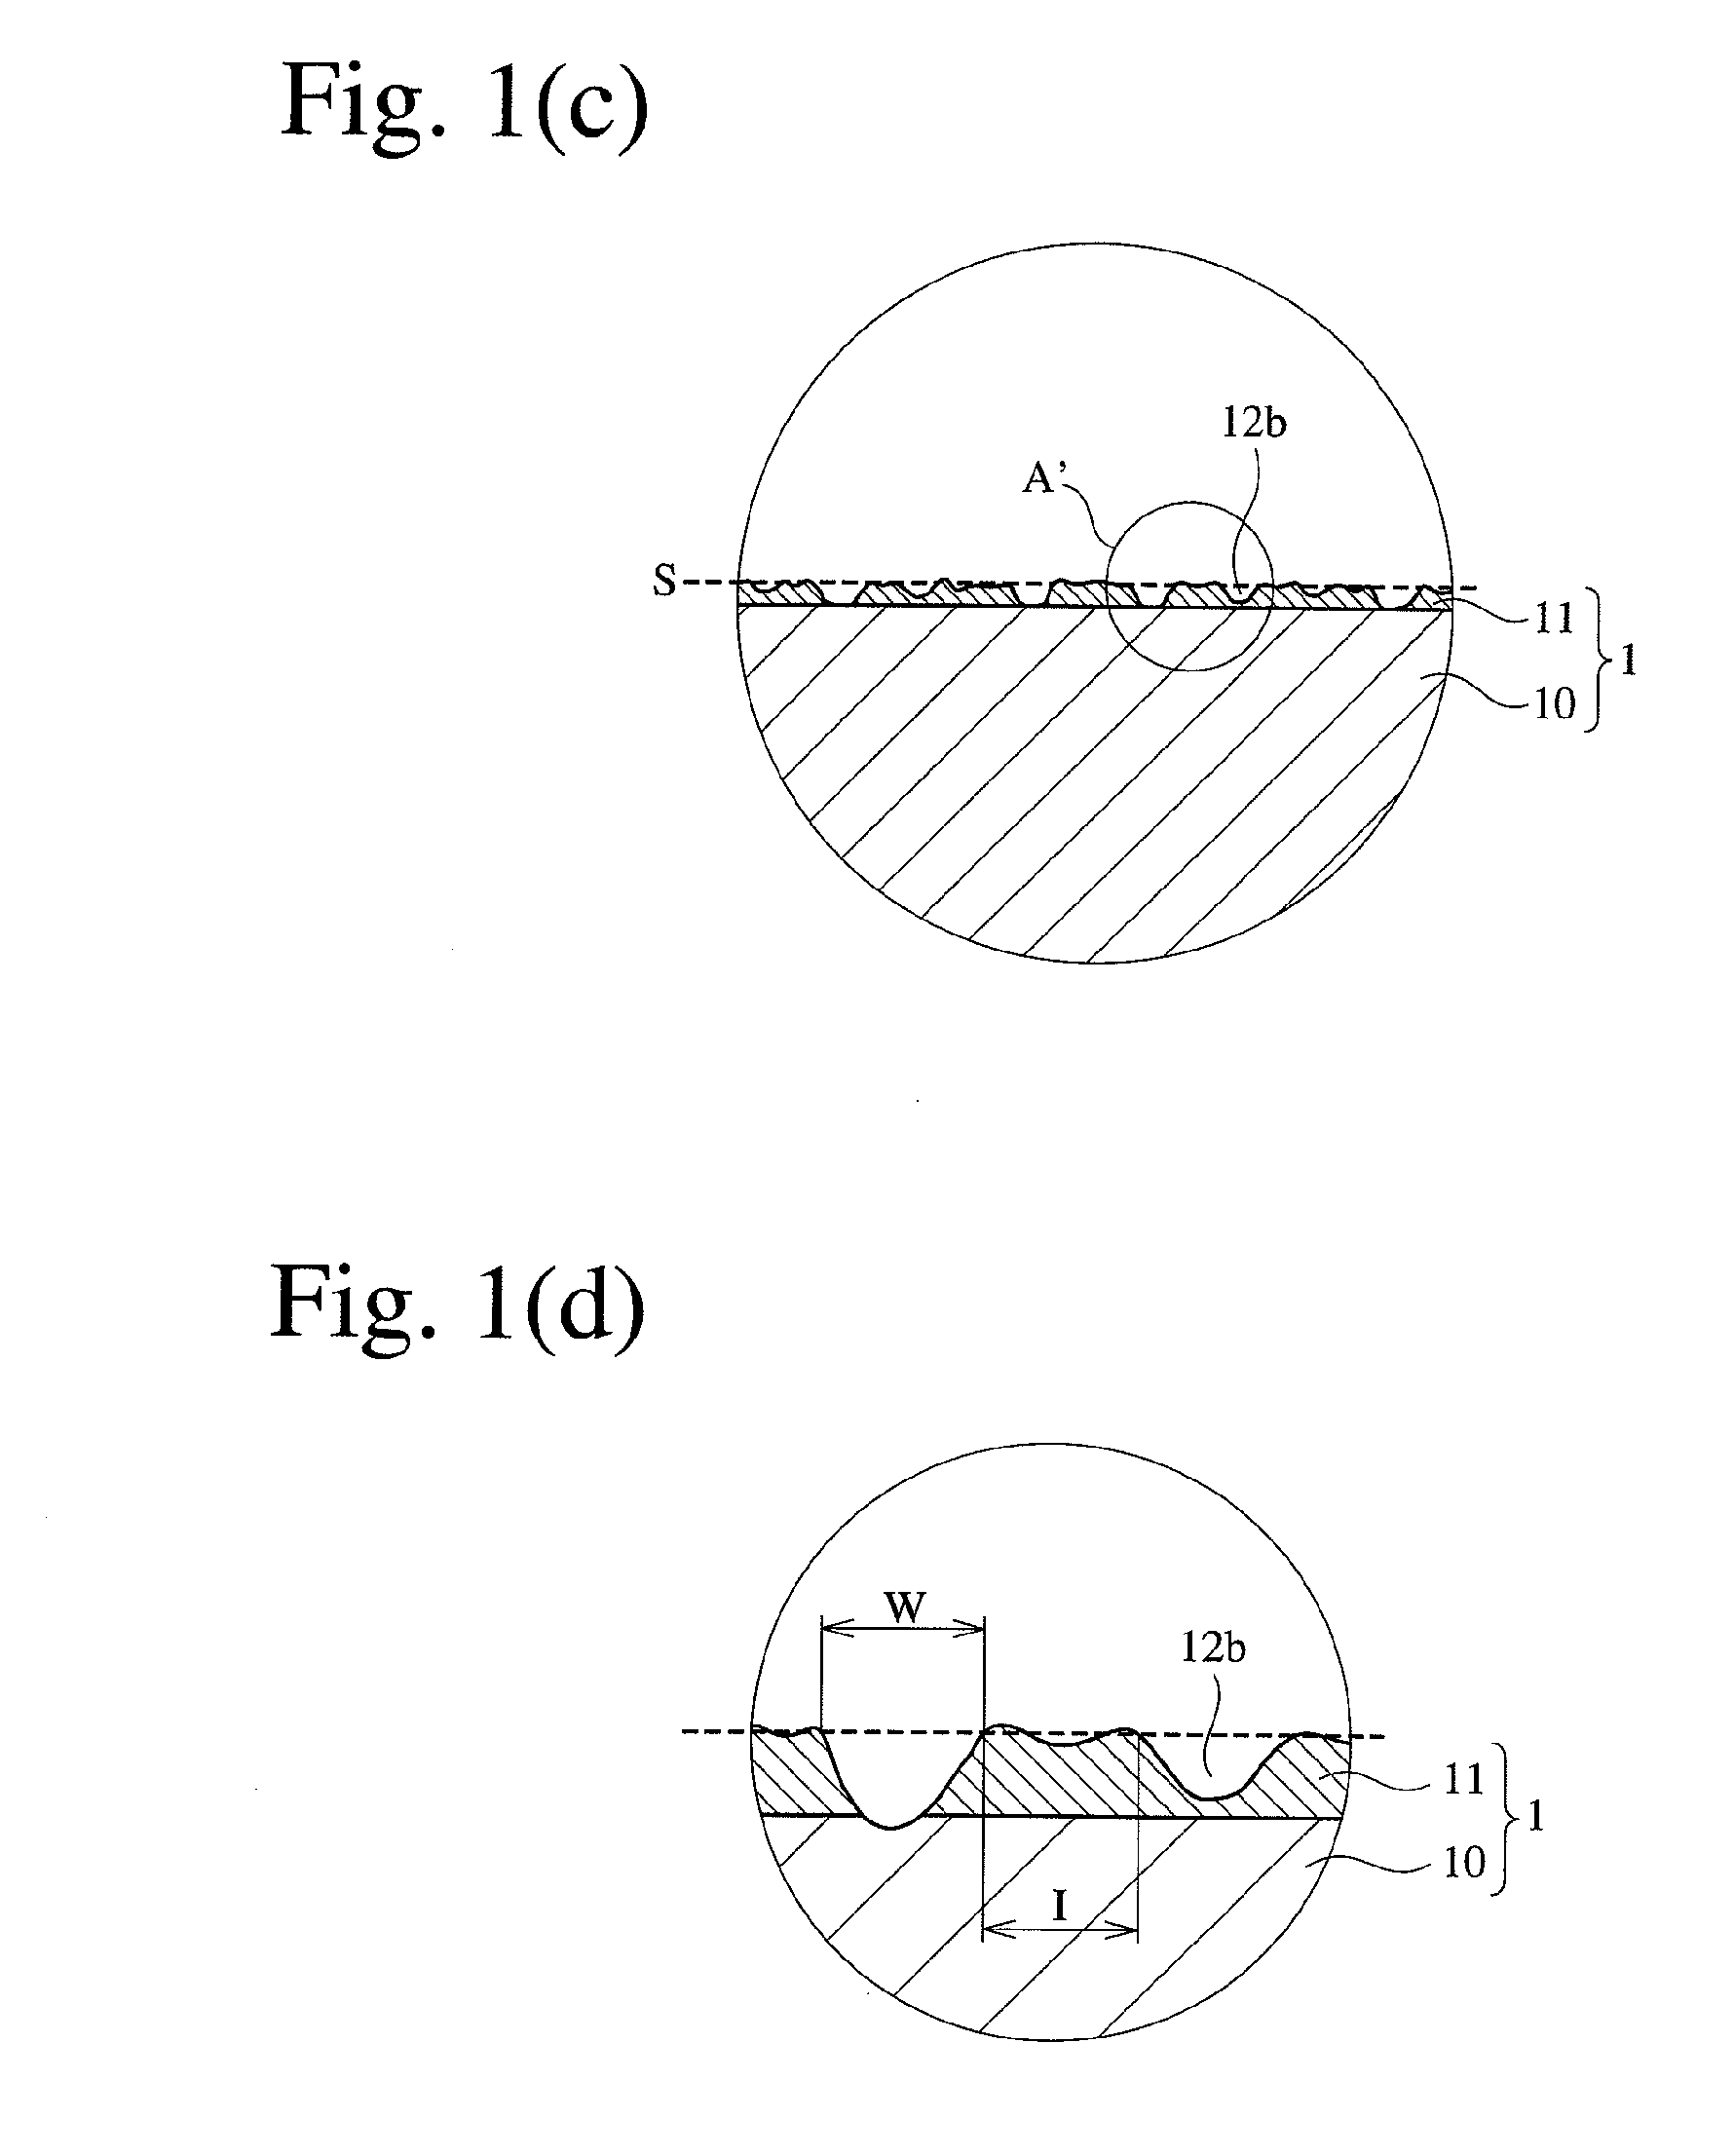 Composite film of linearly-scratched, thin metal film and plastic film, and its production apparatus